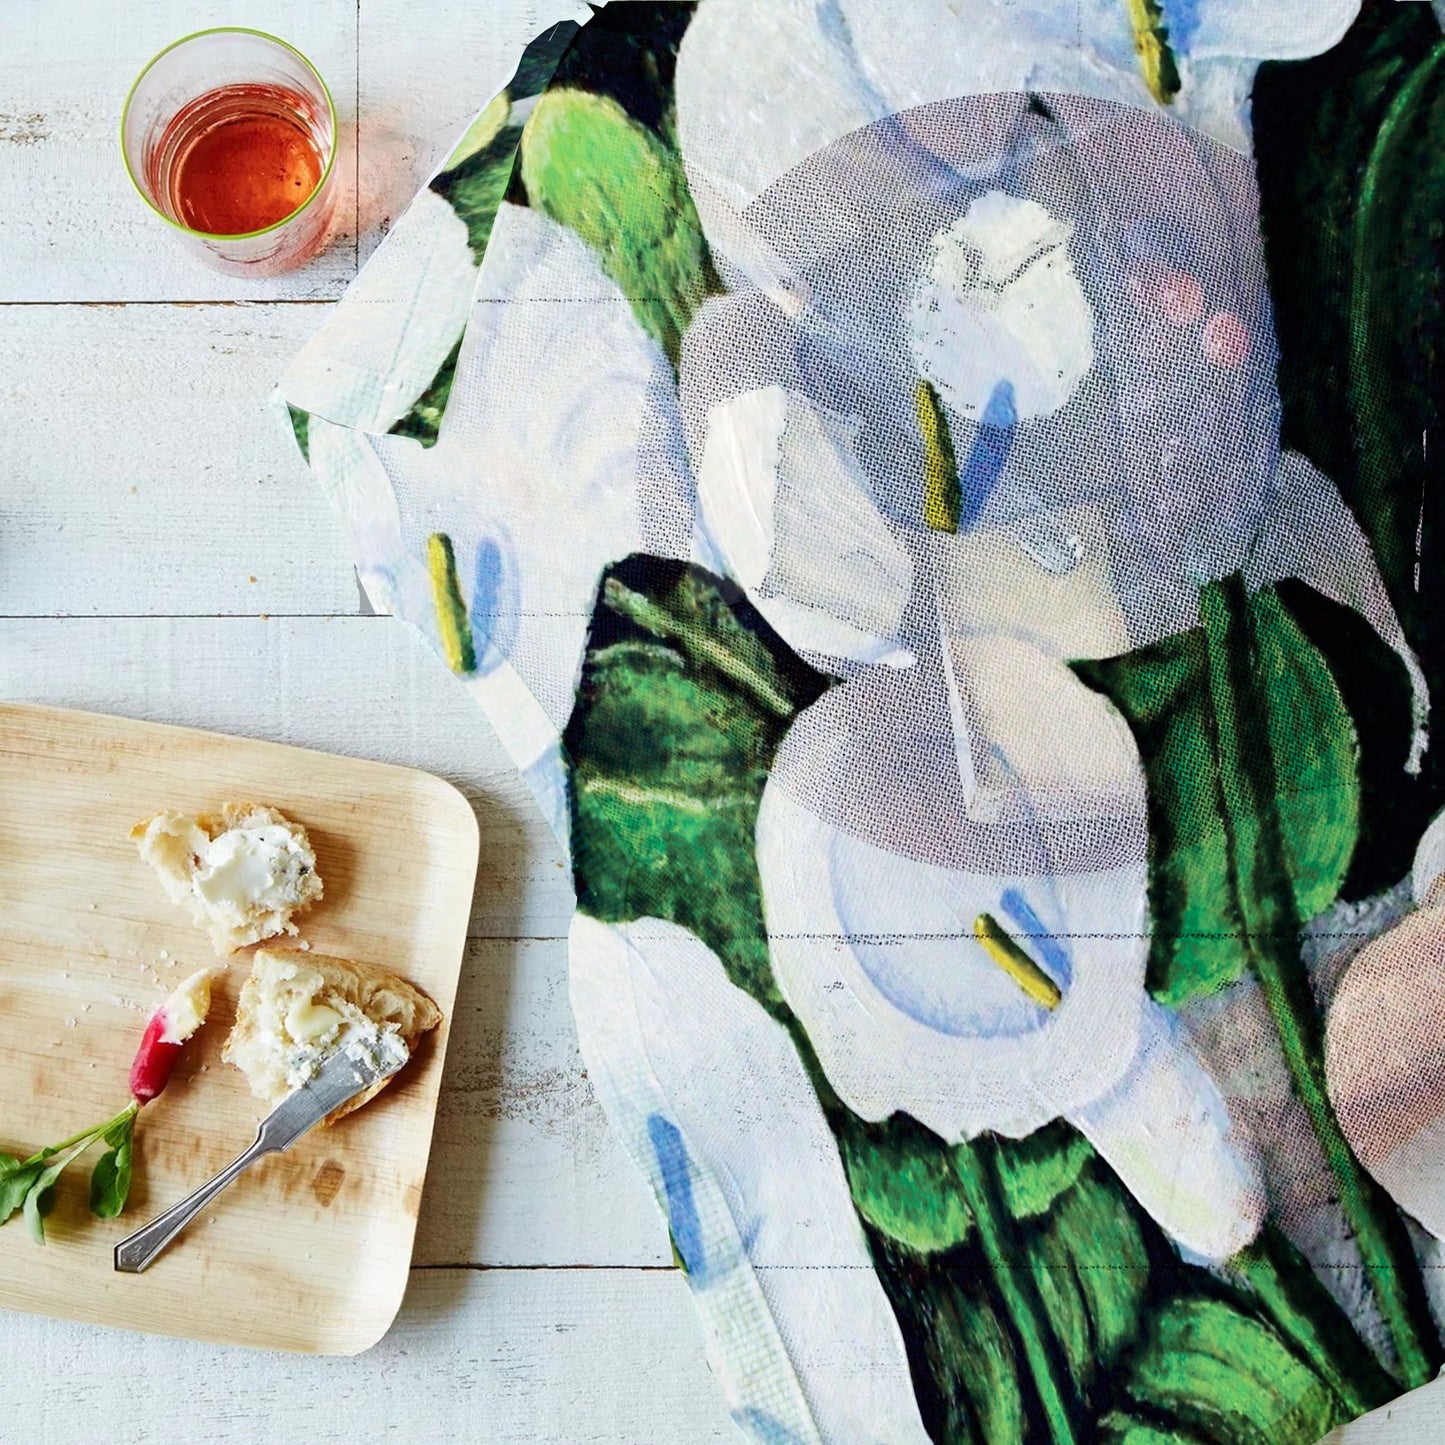 Arum Lilies Table Net Cover by Marthie Potgieter